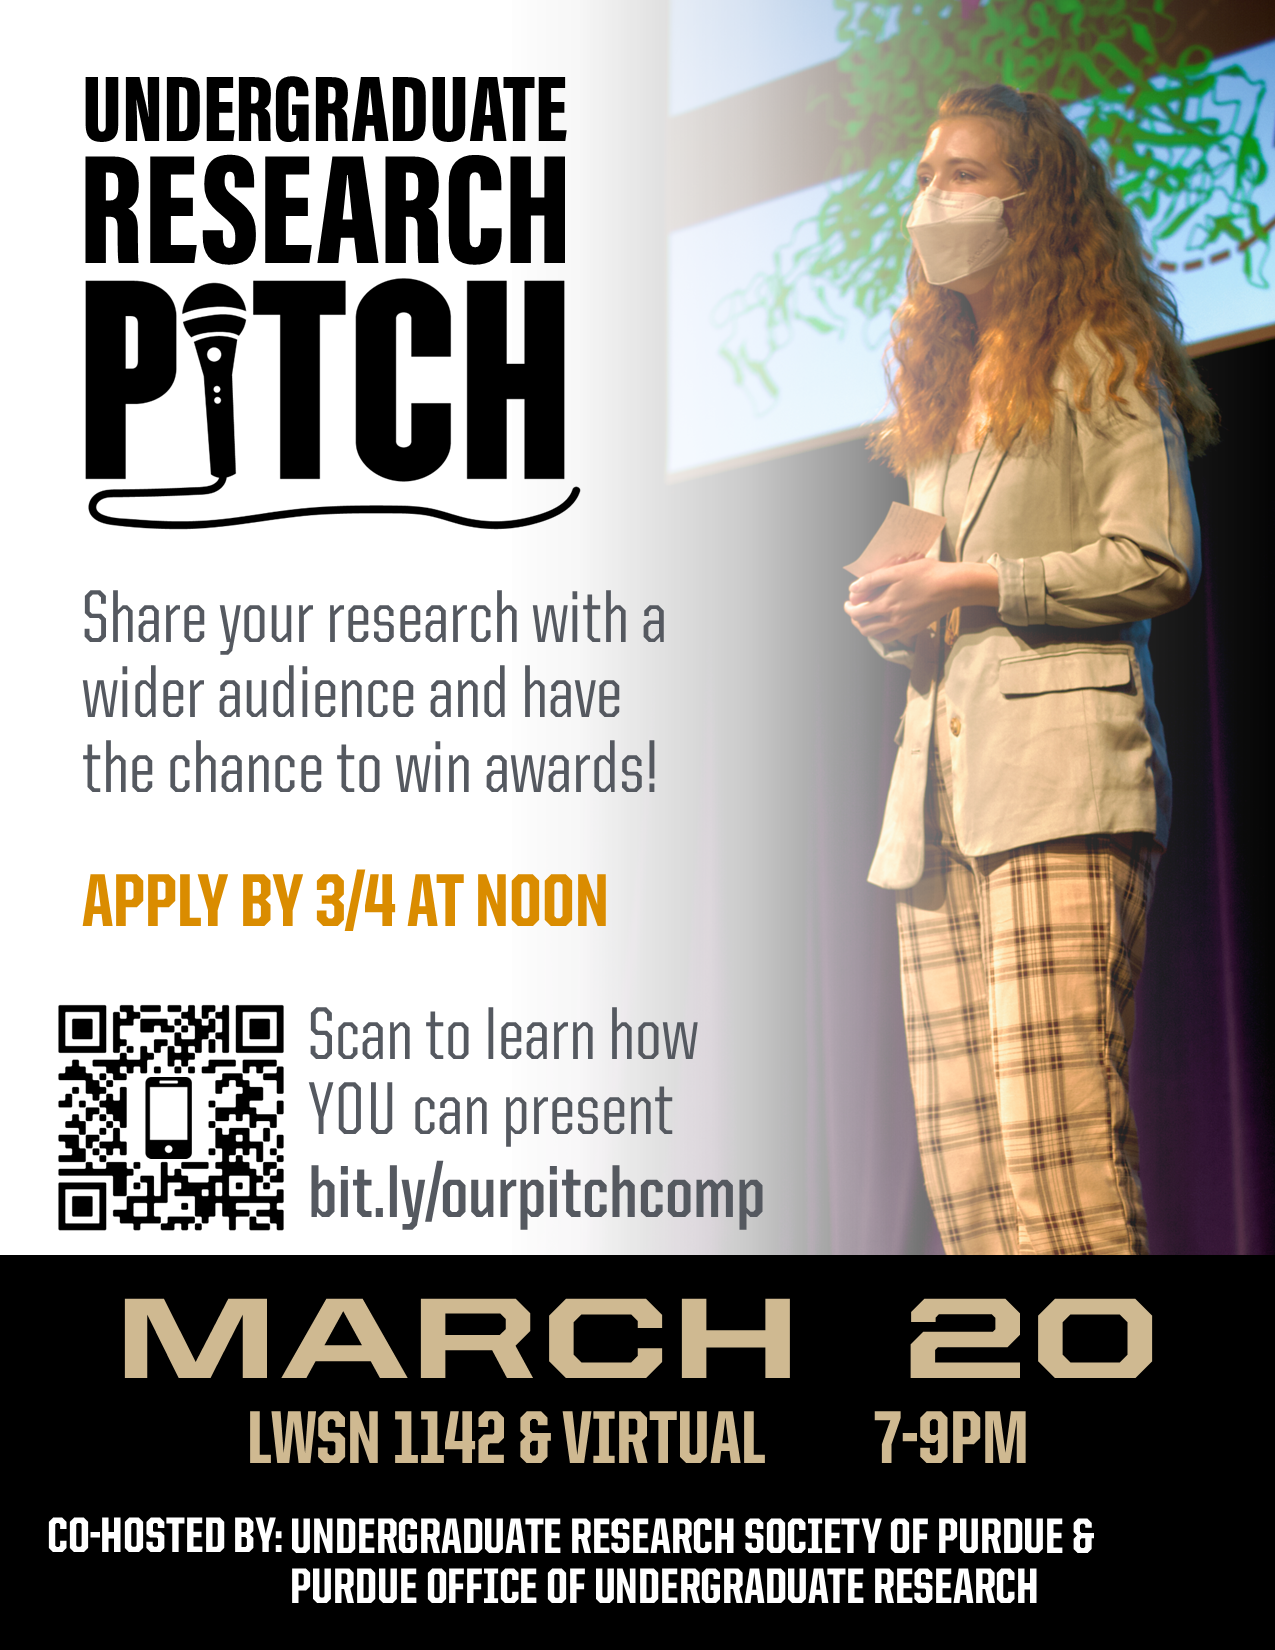 Flier for research pitch competition. Everything on flier is on the page.